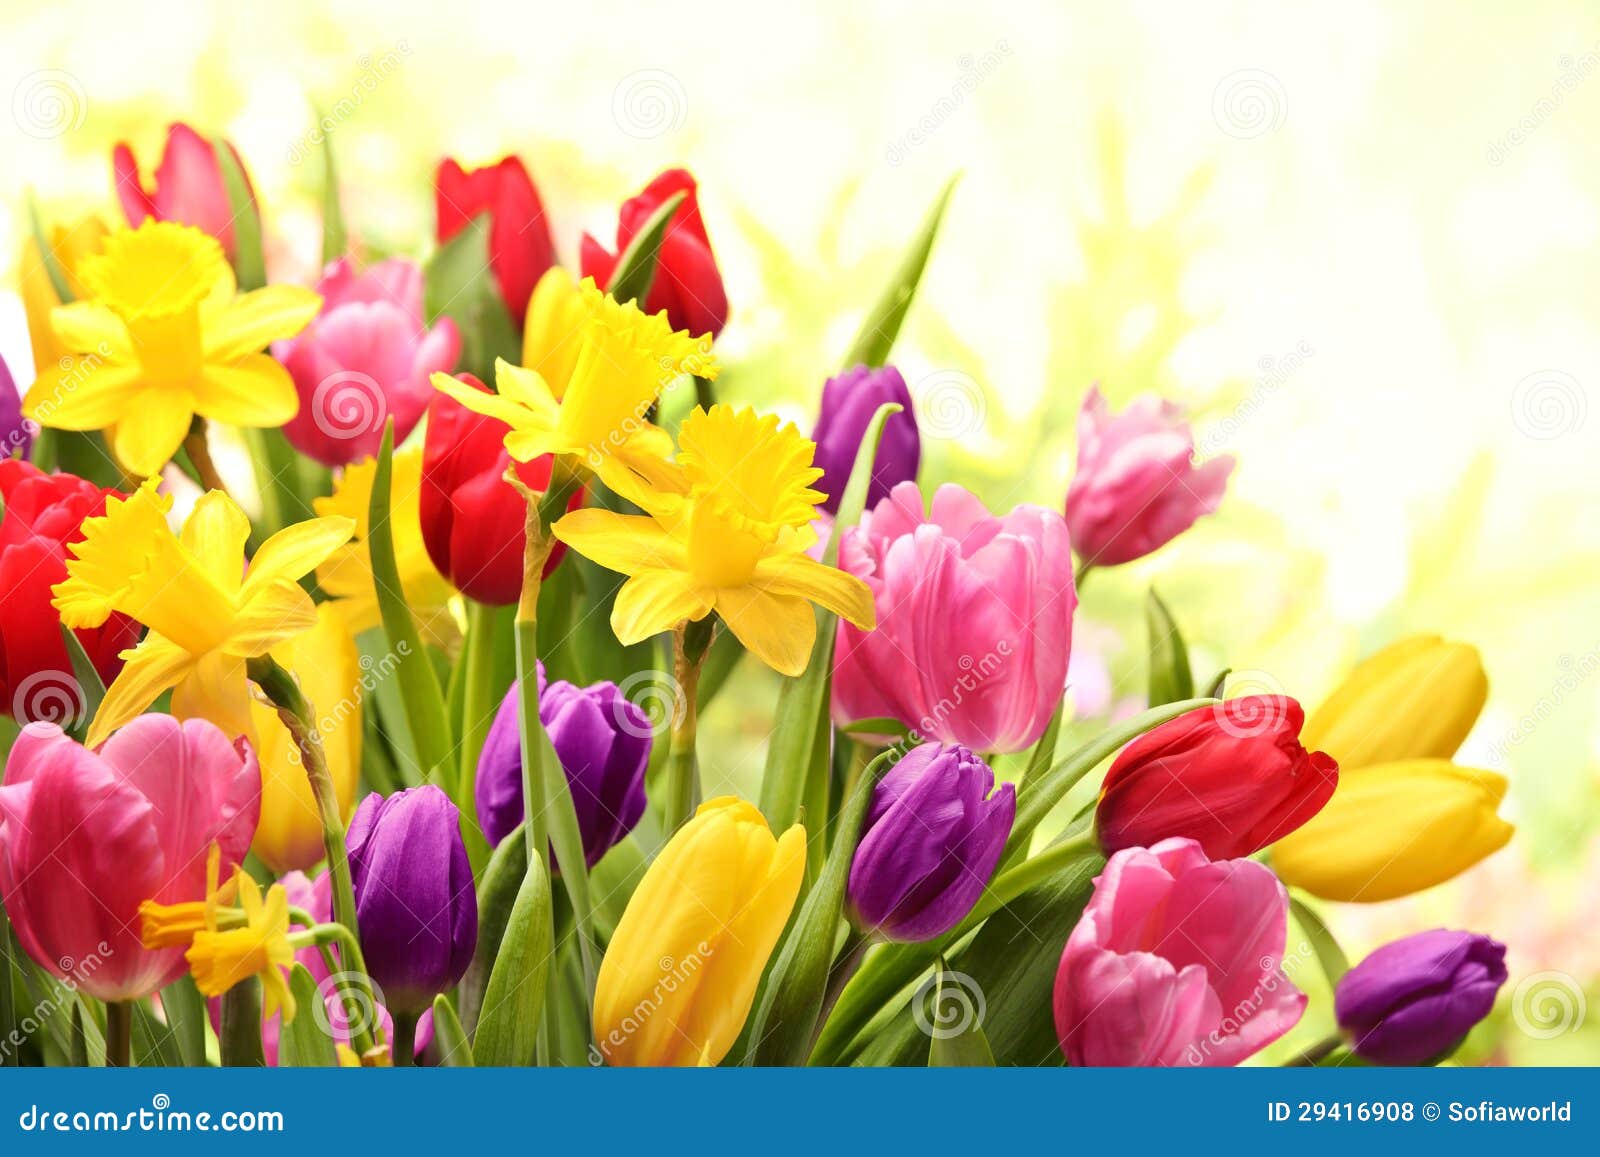 Colorful Tulips and Daffodils Stock Photo - Image of flower, pink: 29416908